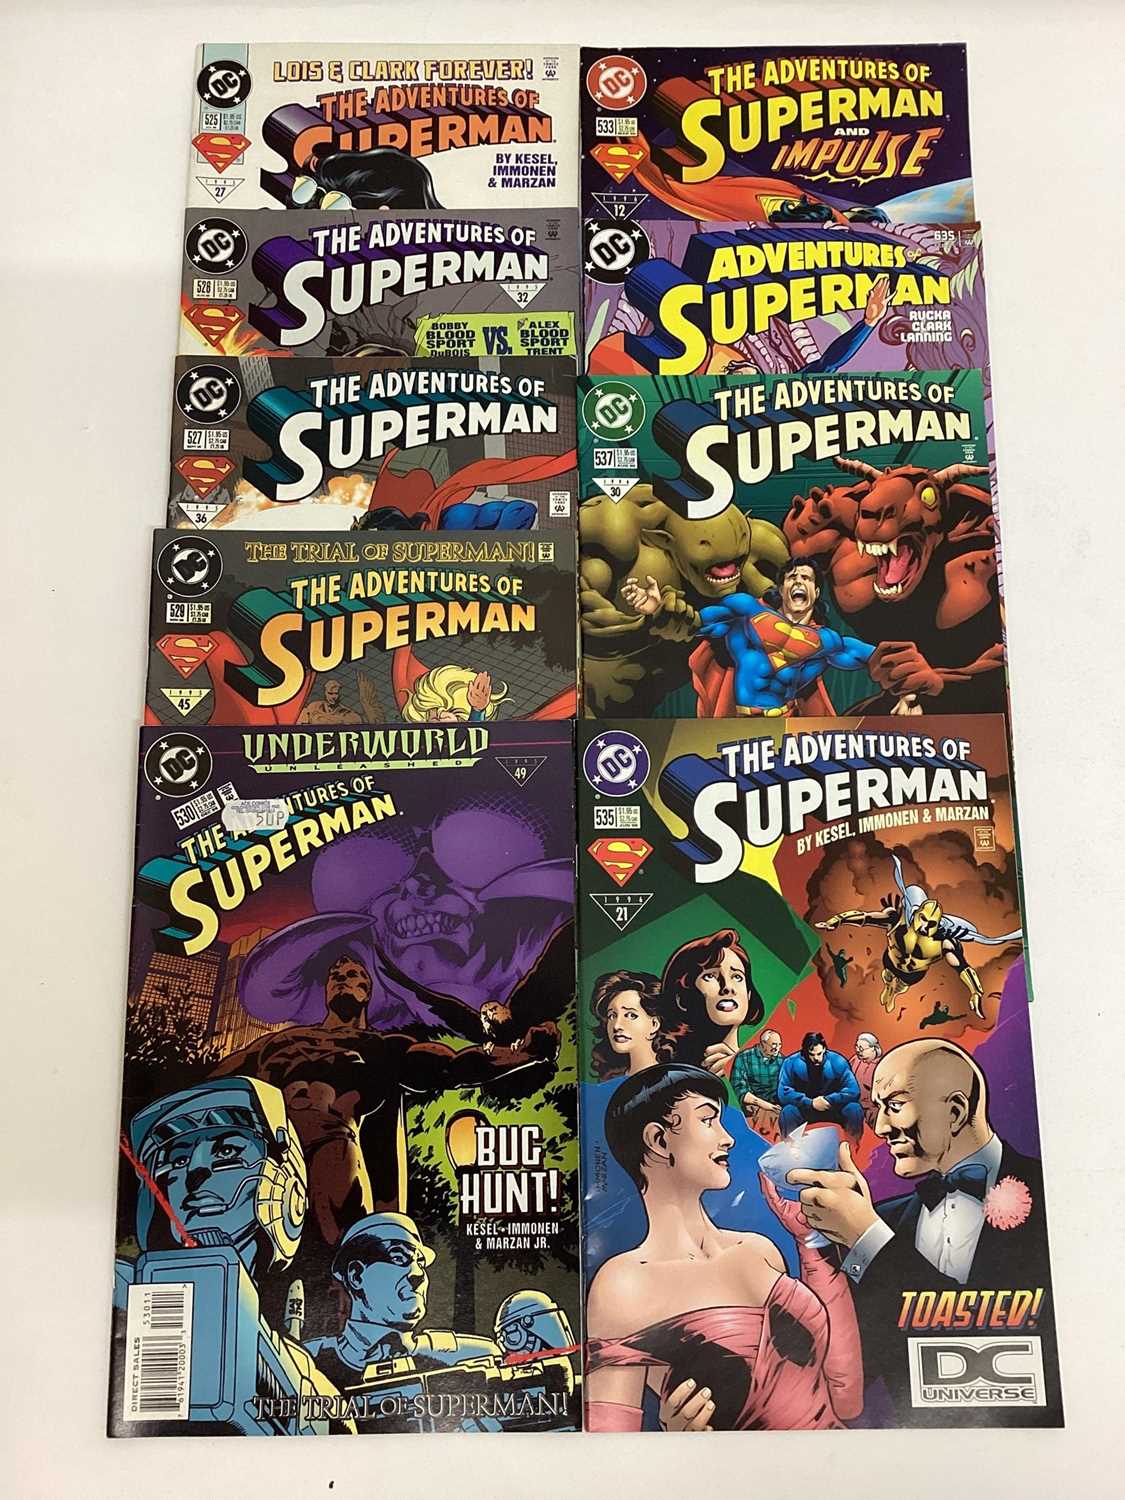 Large quantity of DC Comics, The Adventures of Superman - Image 9 of 9